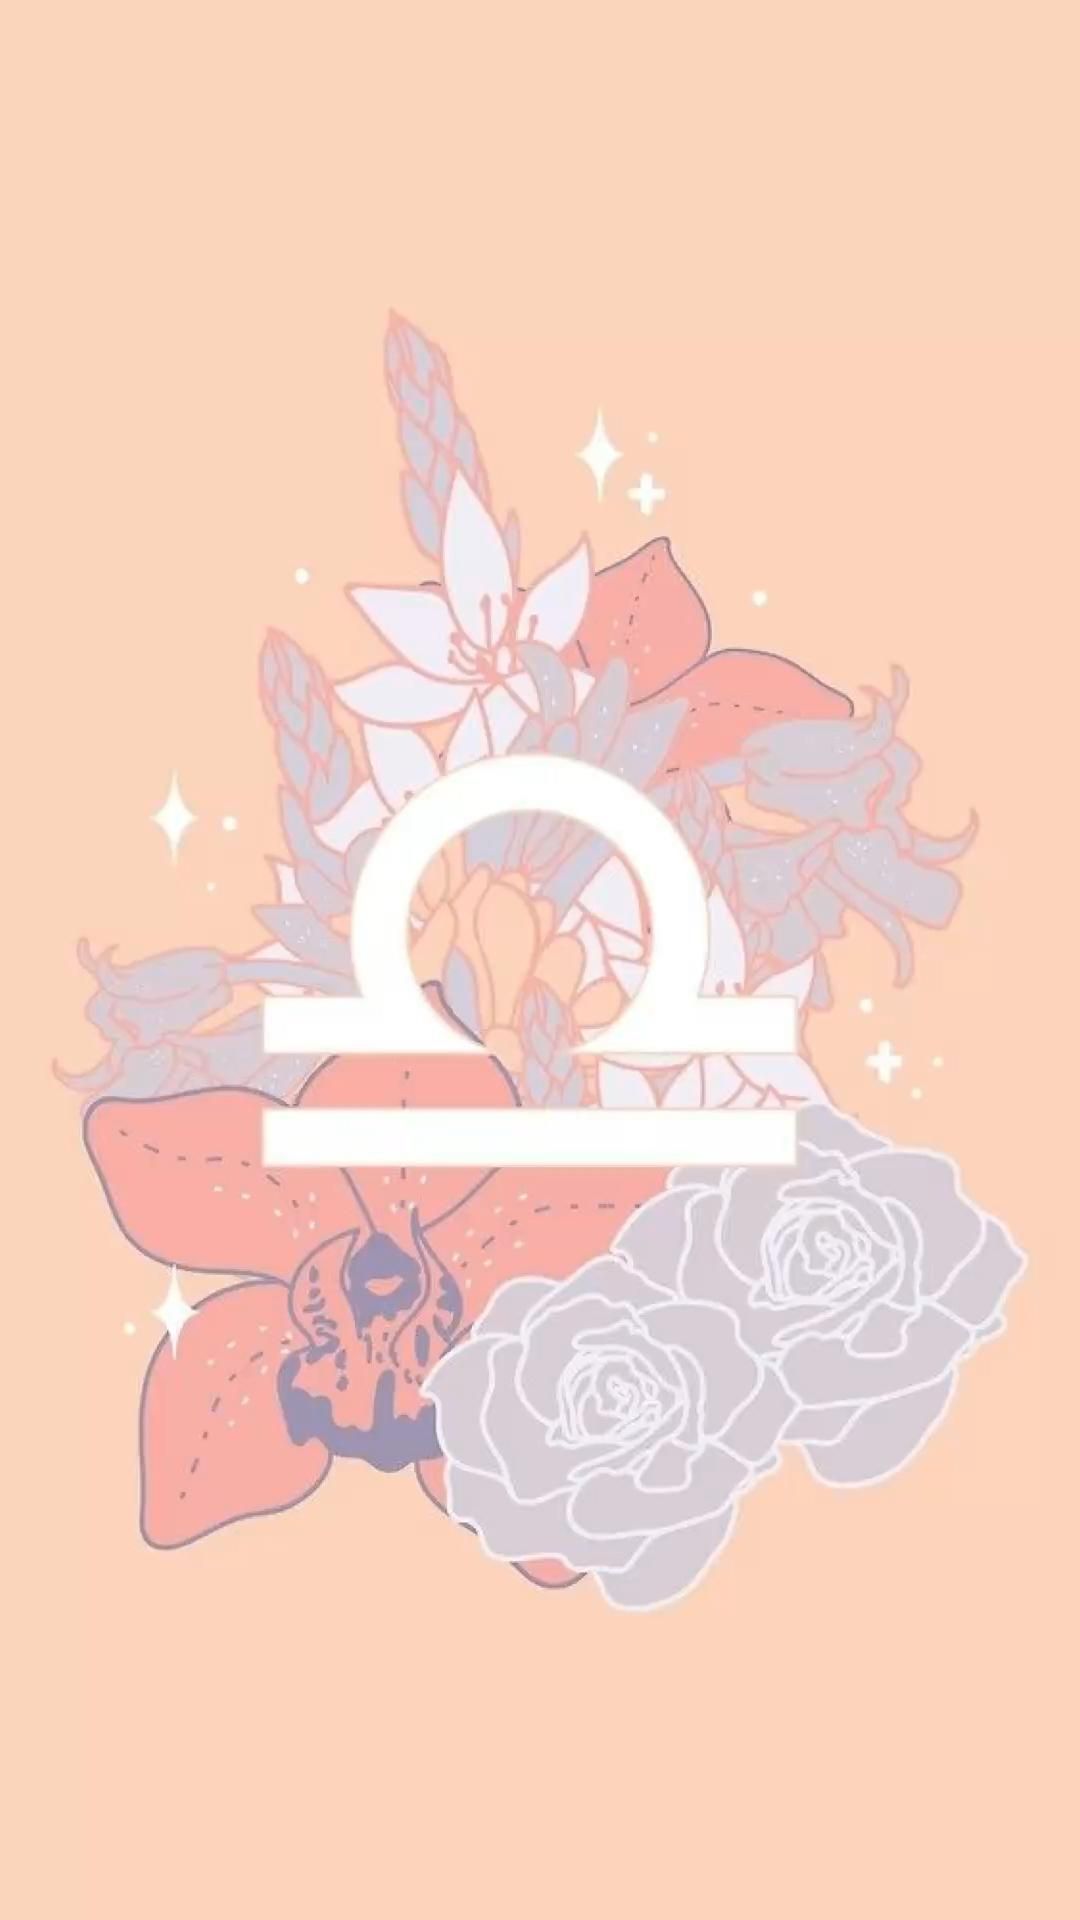 IPhone wallpaper with Libra symbol on a peach background - Libra